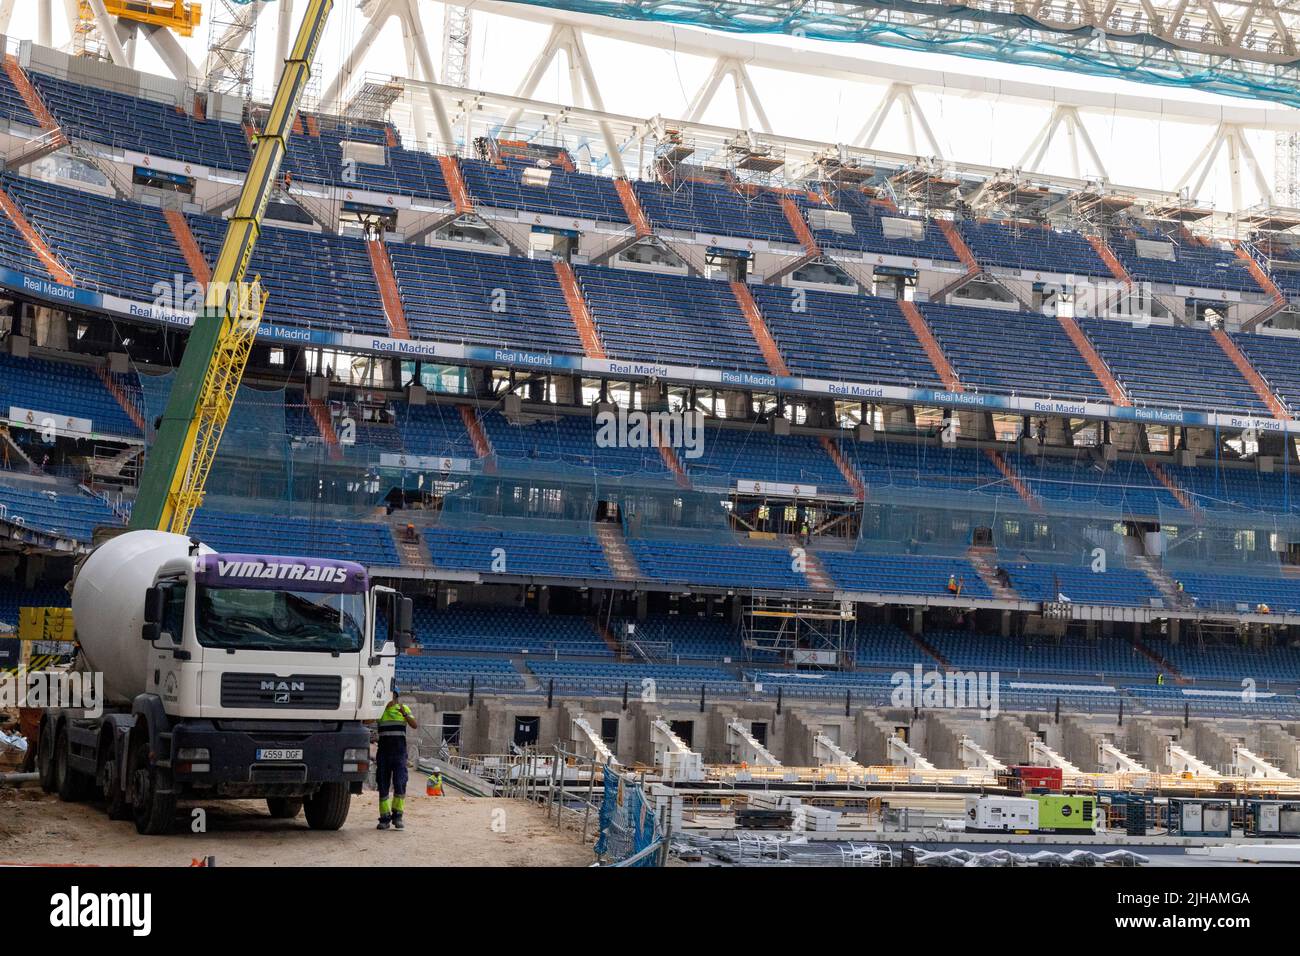 Santiago Bernabeu. Stadium. Interior of the Santiago Bernabu stadium with the construction process for the complete renovation of the Real Madrid C.F Stock Photo